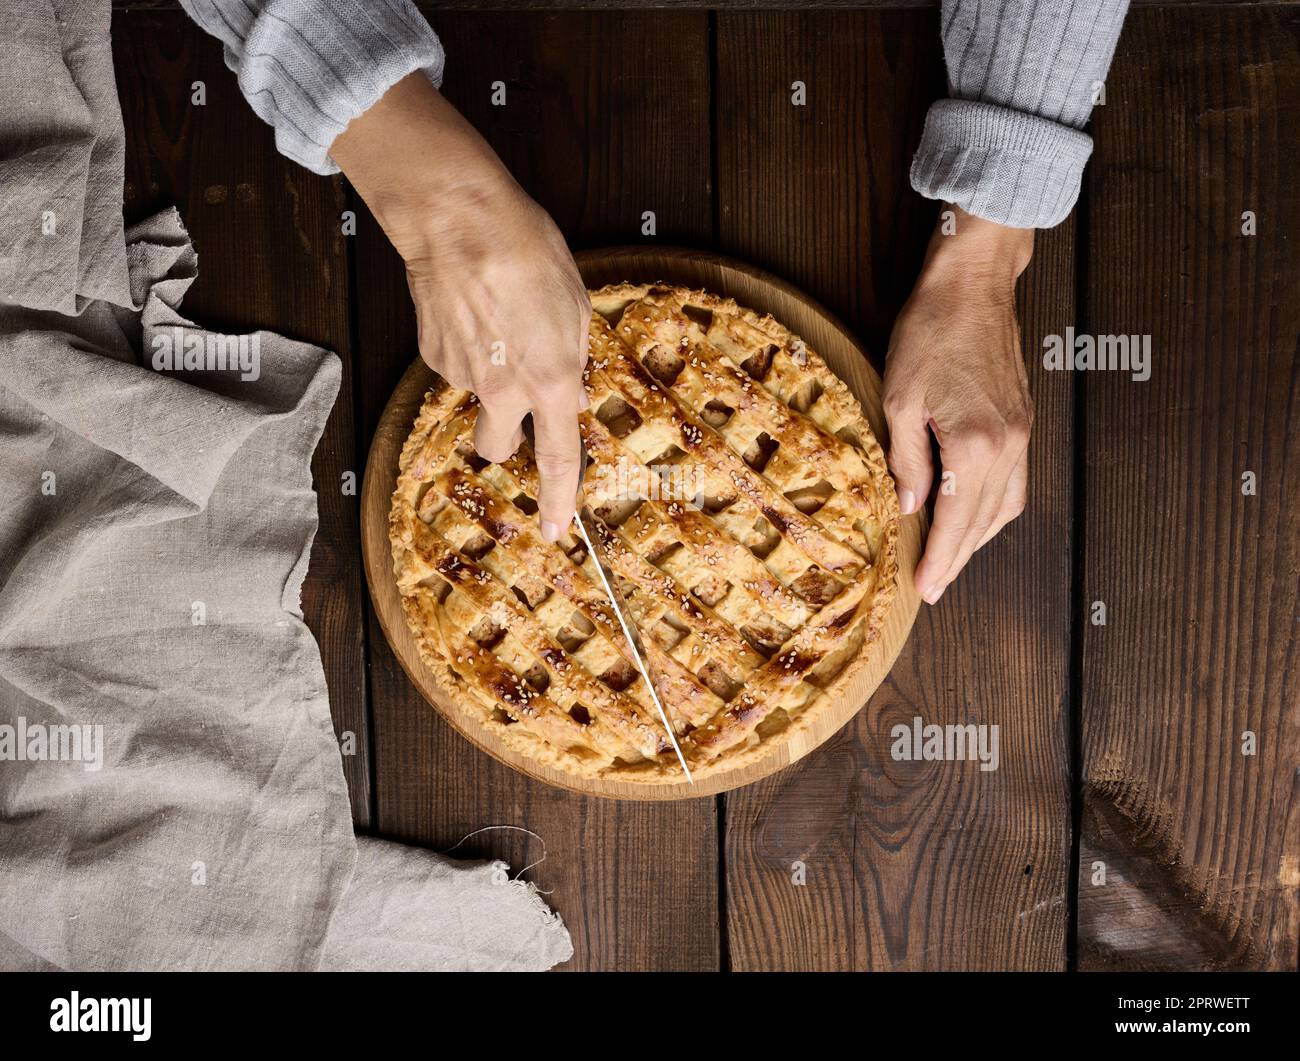 A woman cuts a baked round pie with apples with a knife on a wooden table Stock Photo